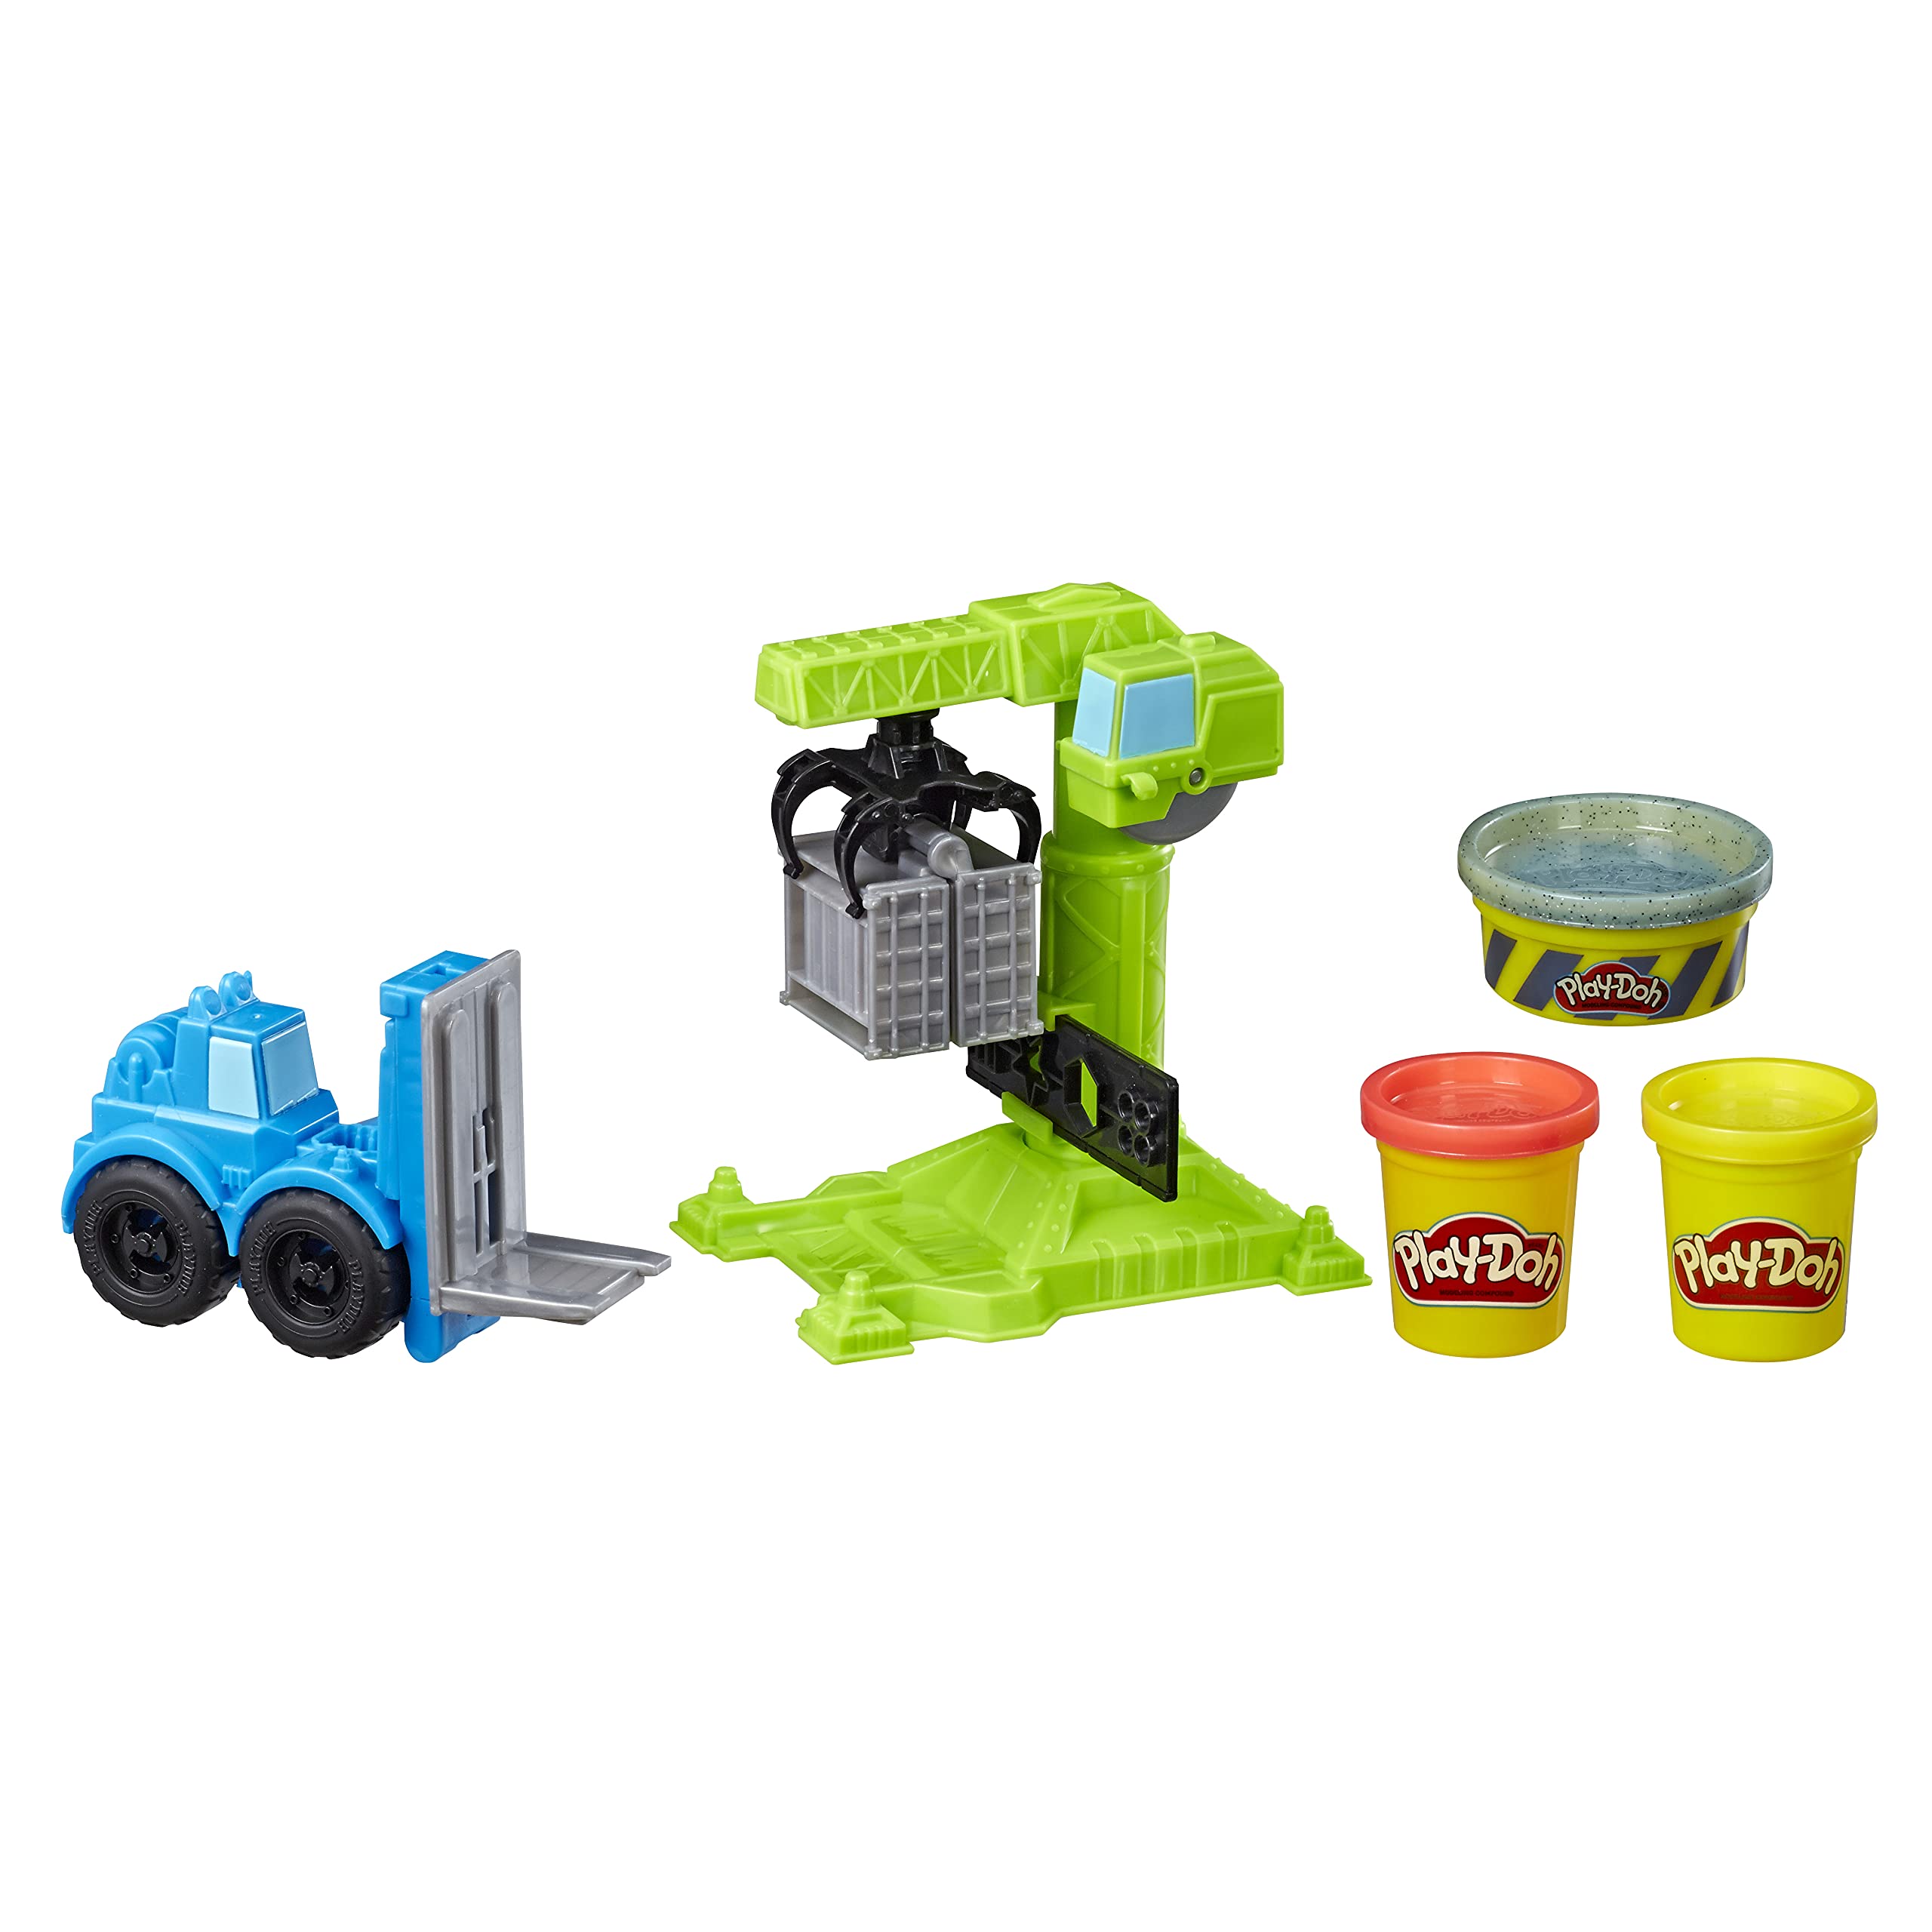 Play-Doh Wheels Crane and Forklift Construction Toys with Non-Toxic Cement Buildin' Compound Plus 2 Additional Colors